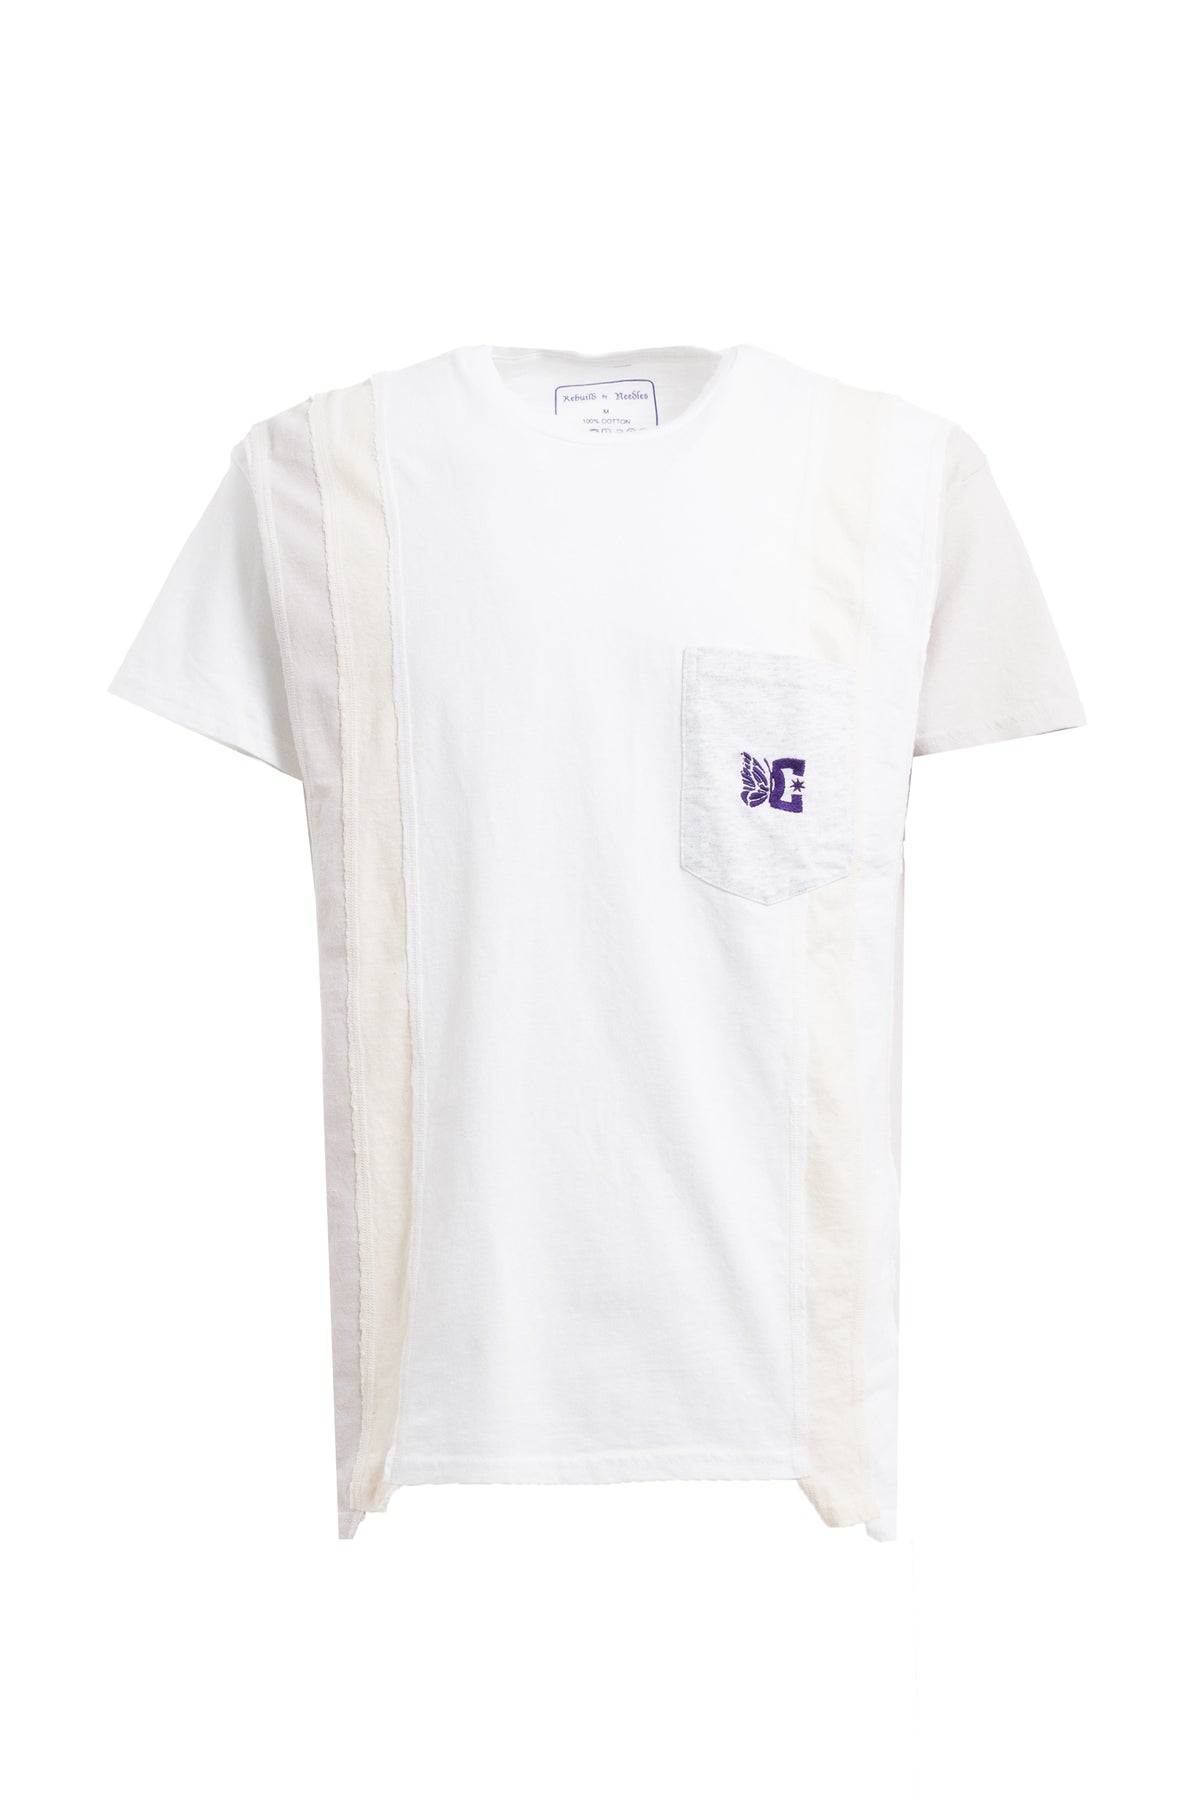 7 CUTS S/S TEE - SOLID / FADE / IVORY / M